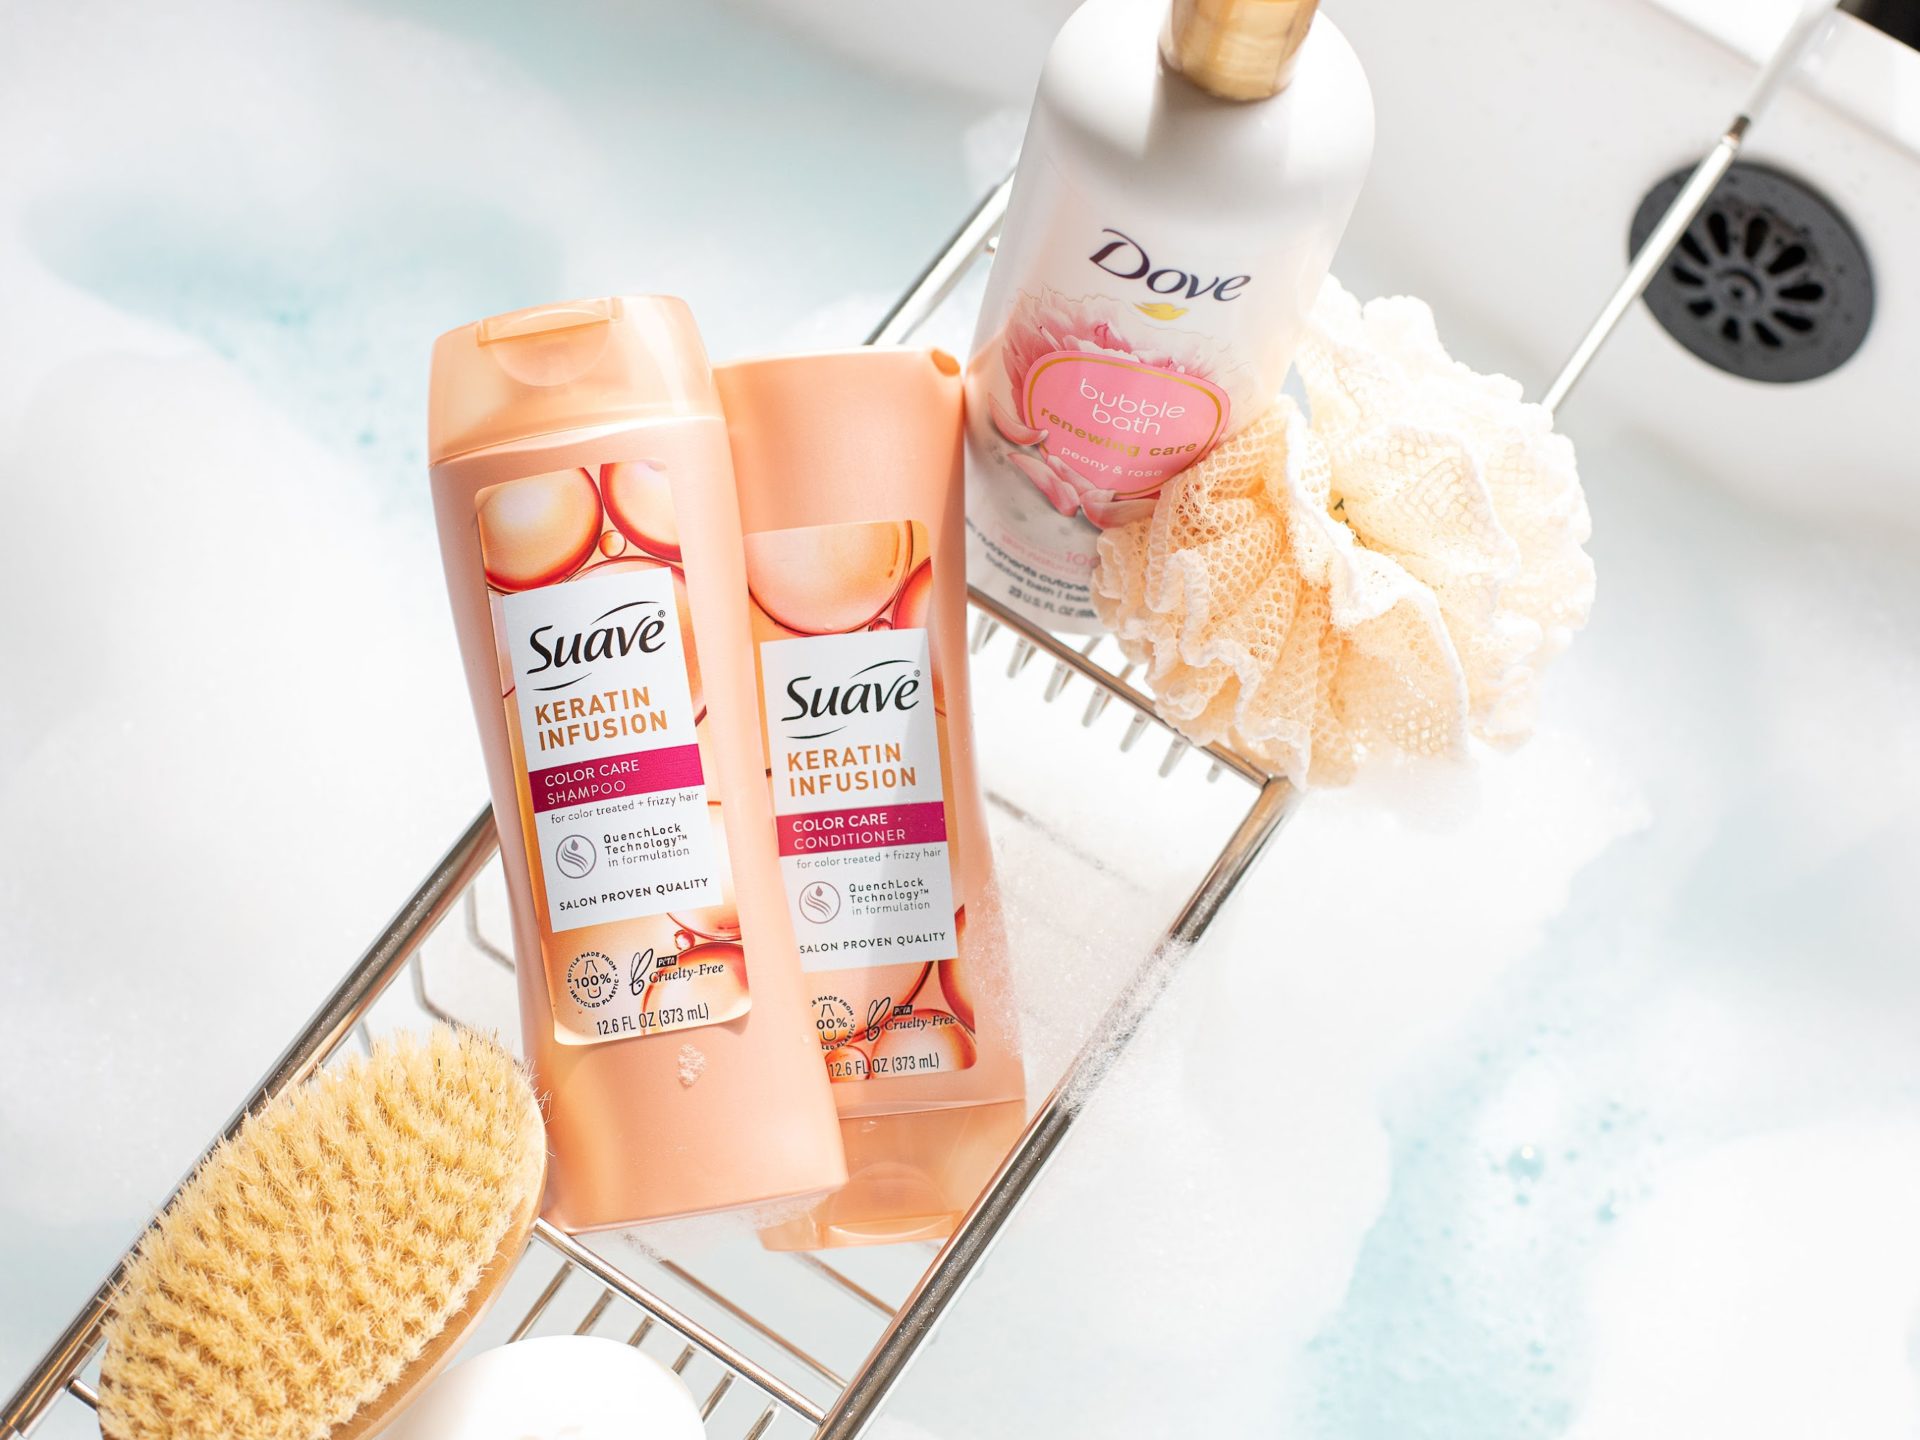 Get Suave Hair Care For $1.99 At Kroger